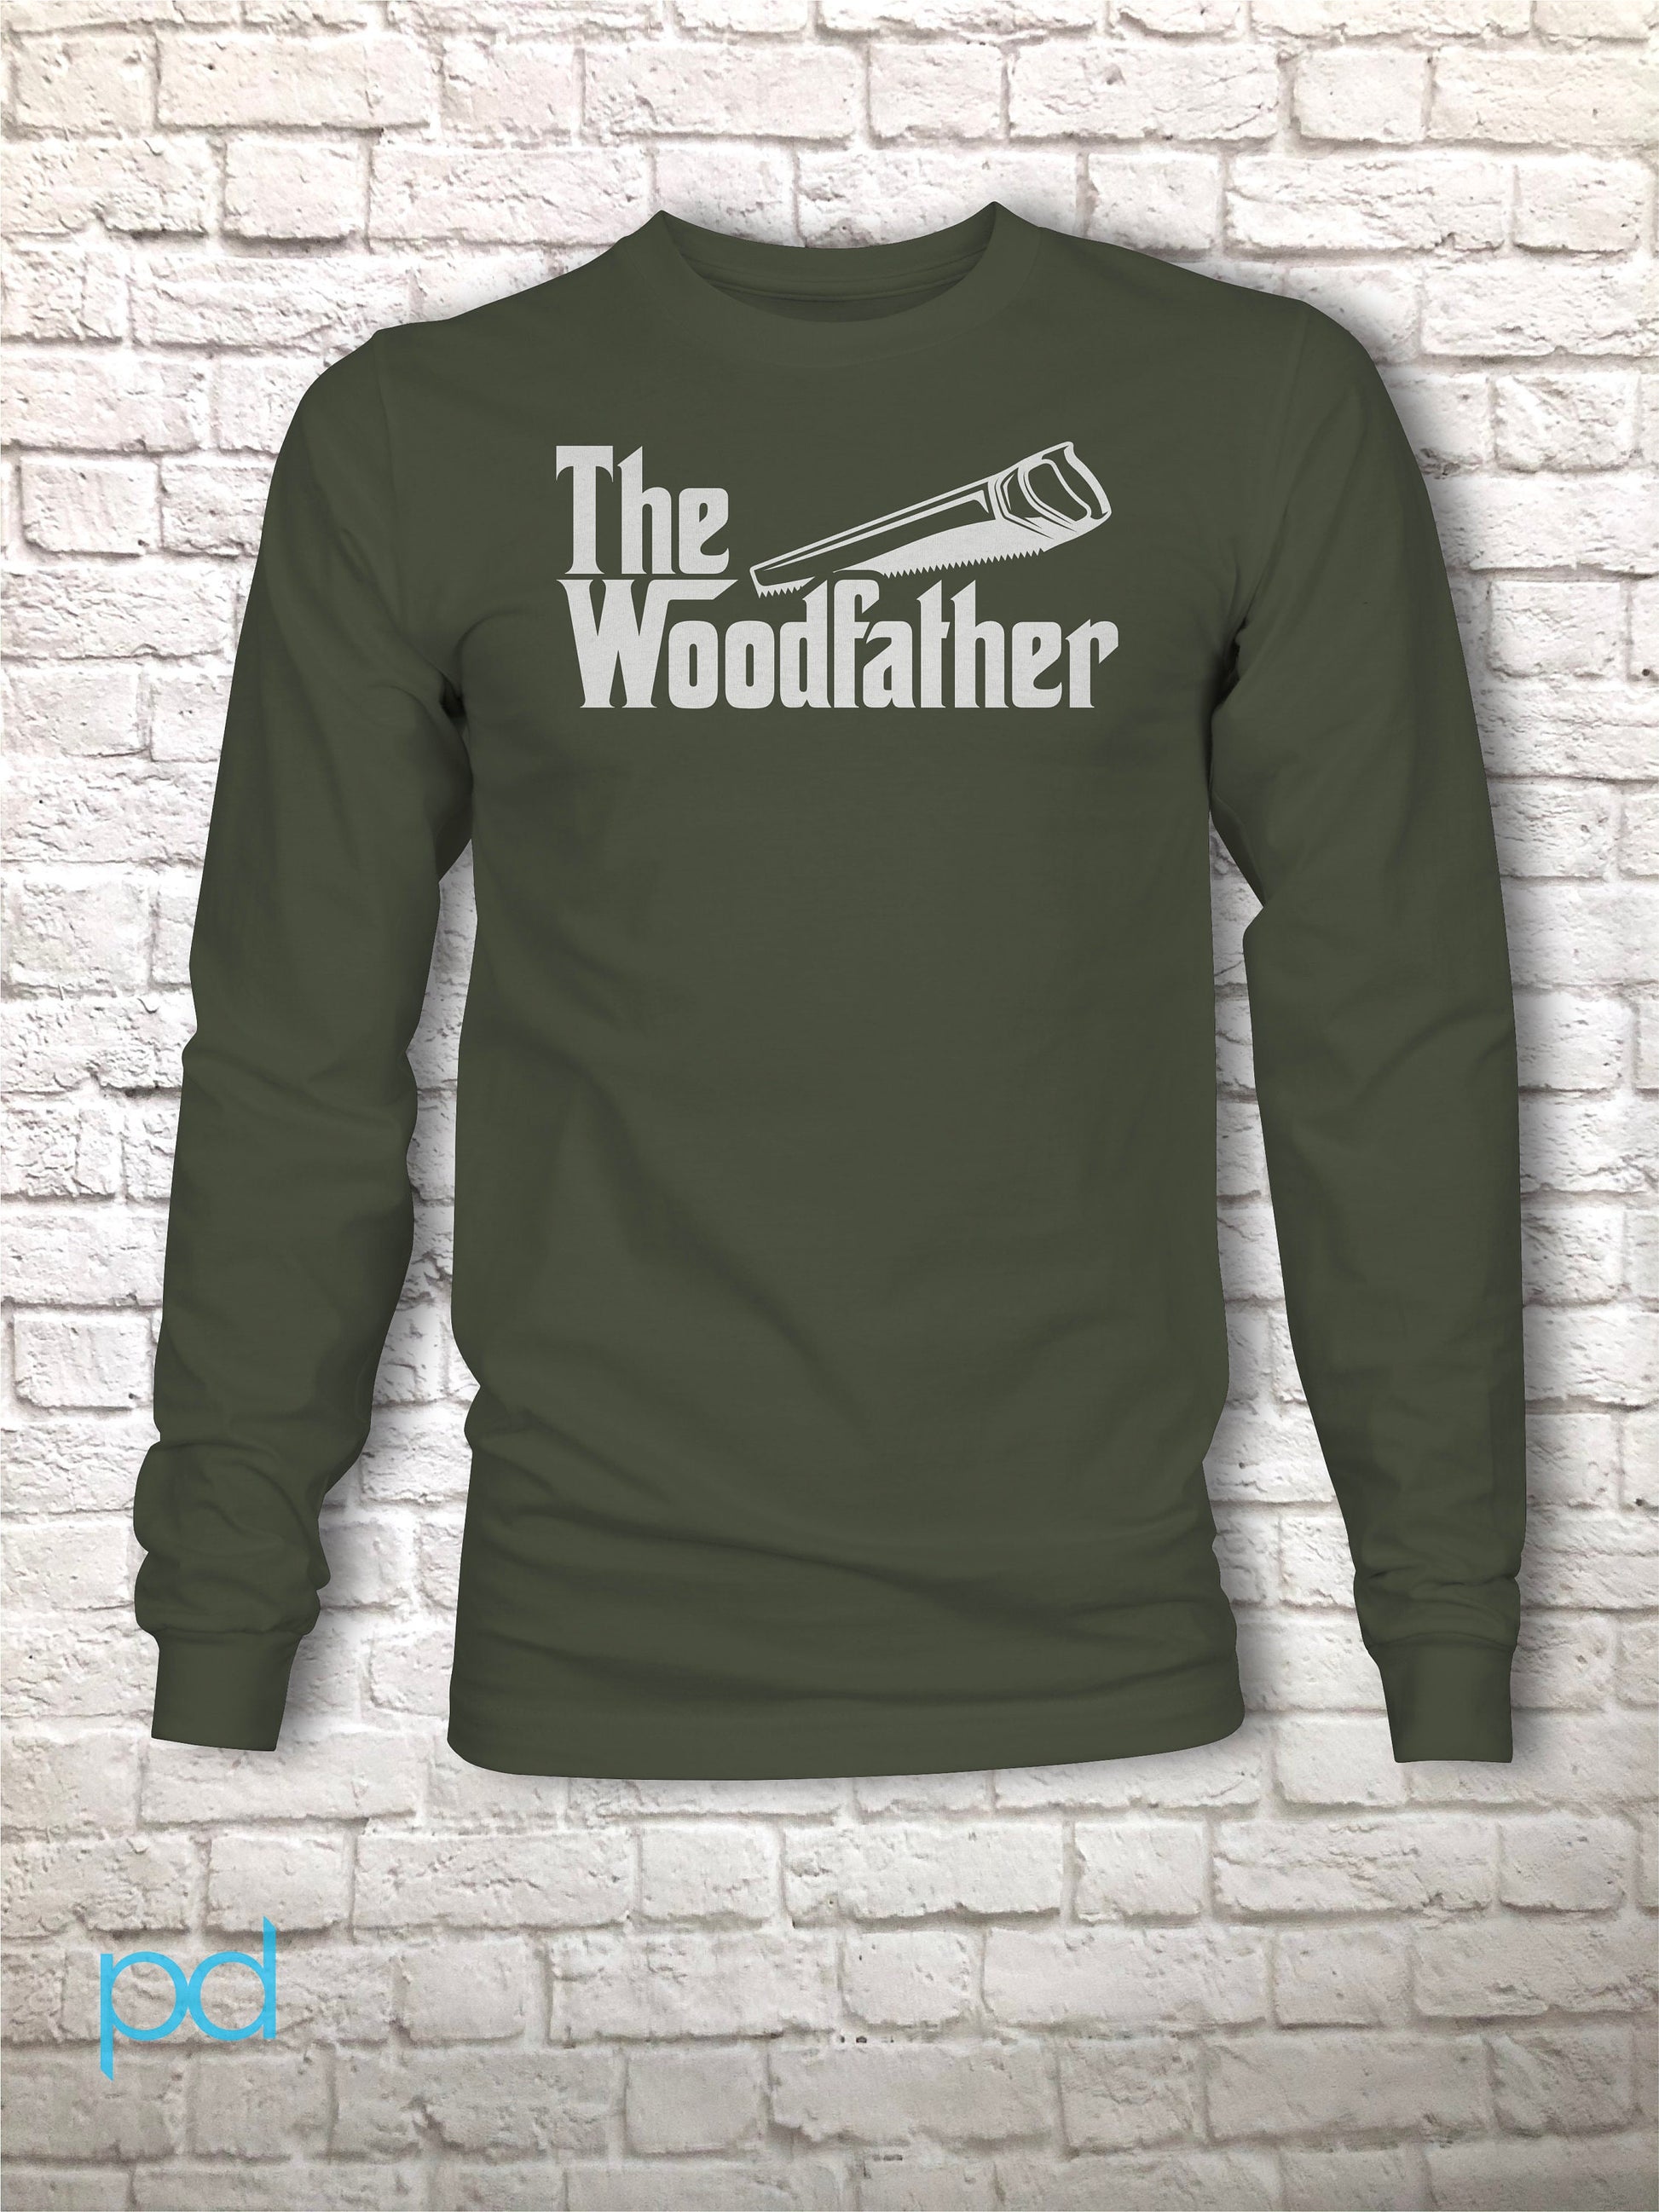 Funny Carpenter Long Sleeve T-shirt, Woodfather Parody Gift Idea, Humorous Woodworking Joiner Longsleeve Tee Shirt, Handsaw Clean